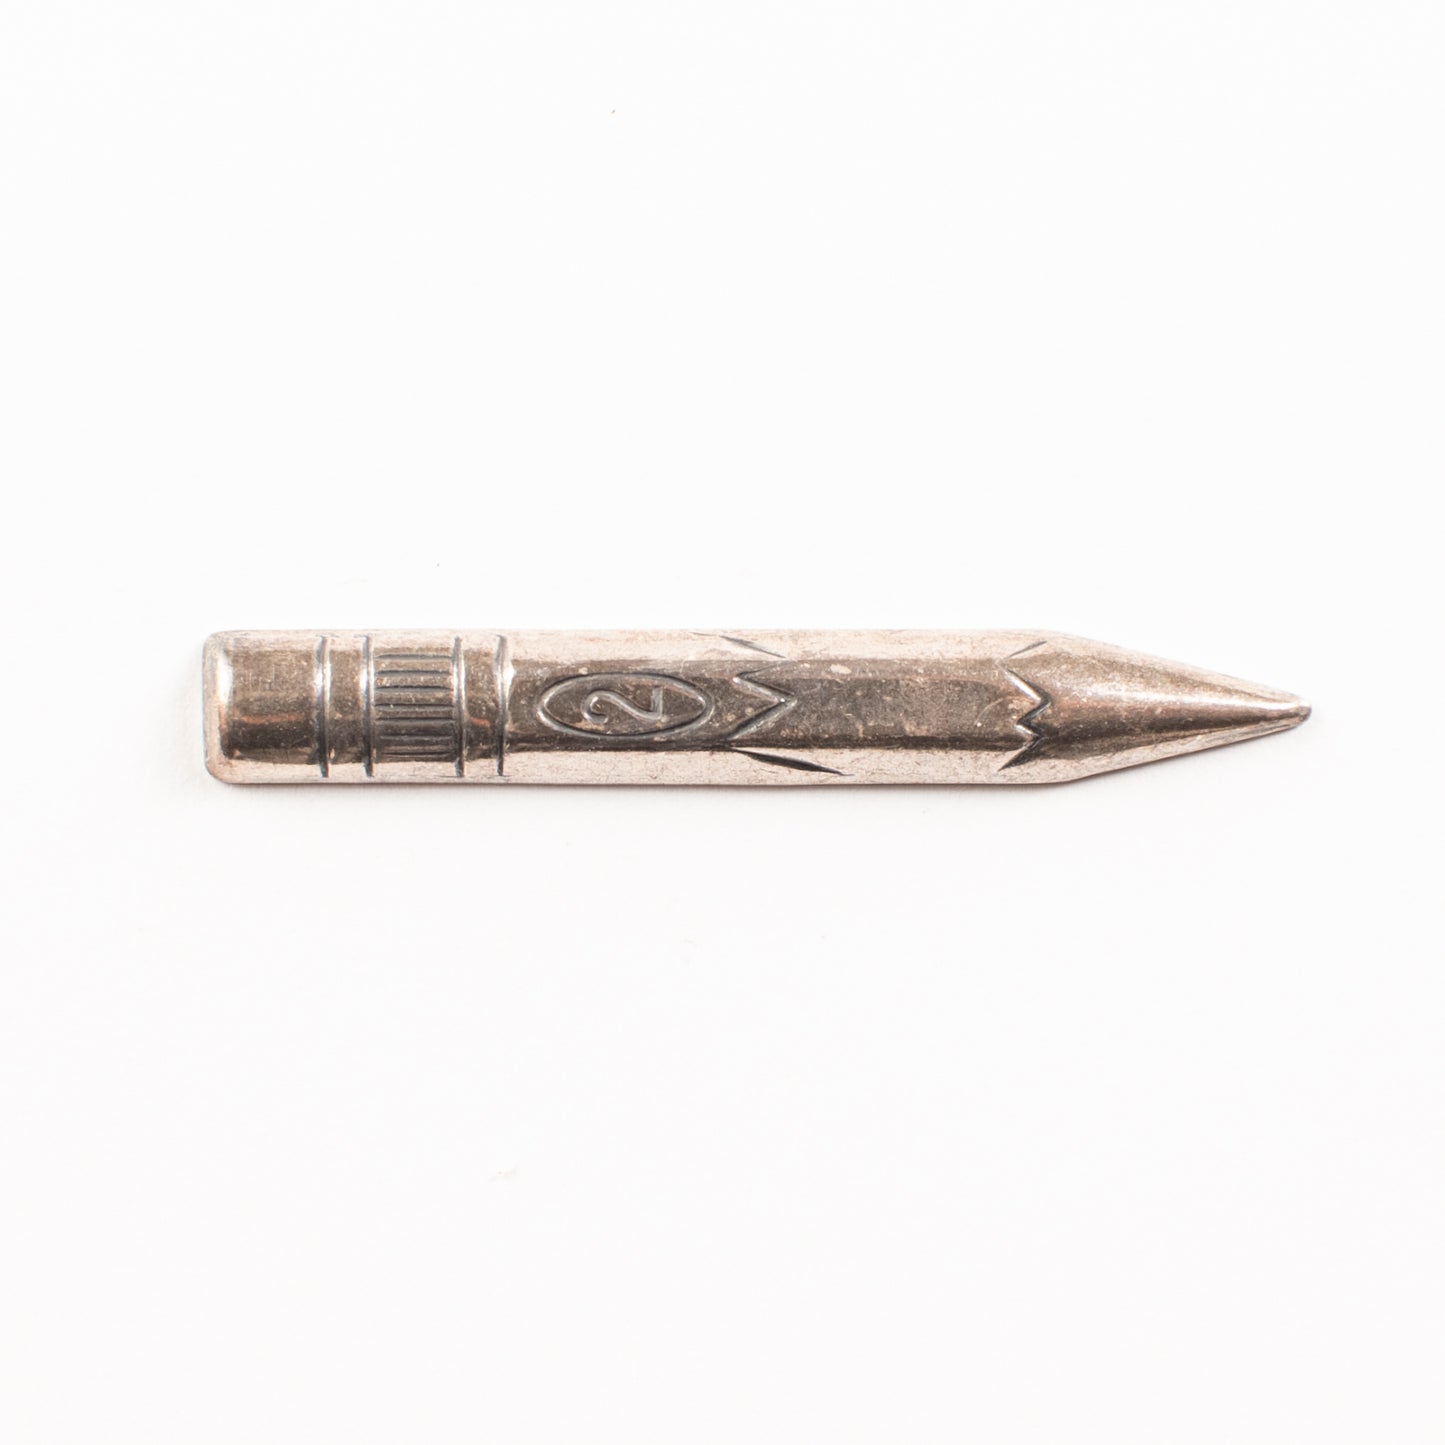 49mm Antique Gold, Classic Silver Finish NO.2 PENCIL charm, each